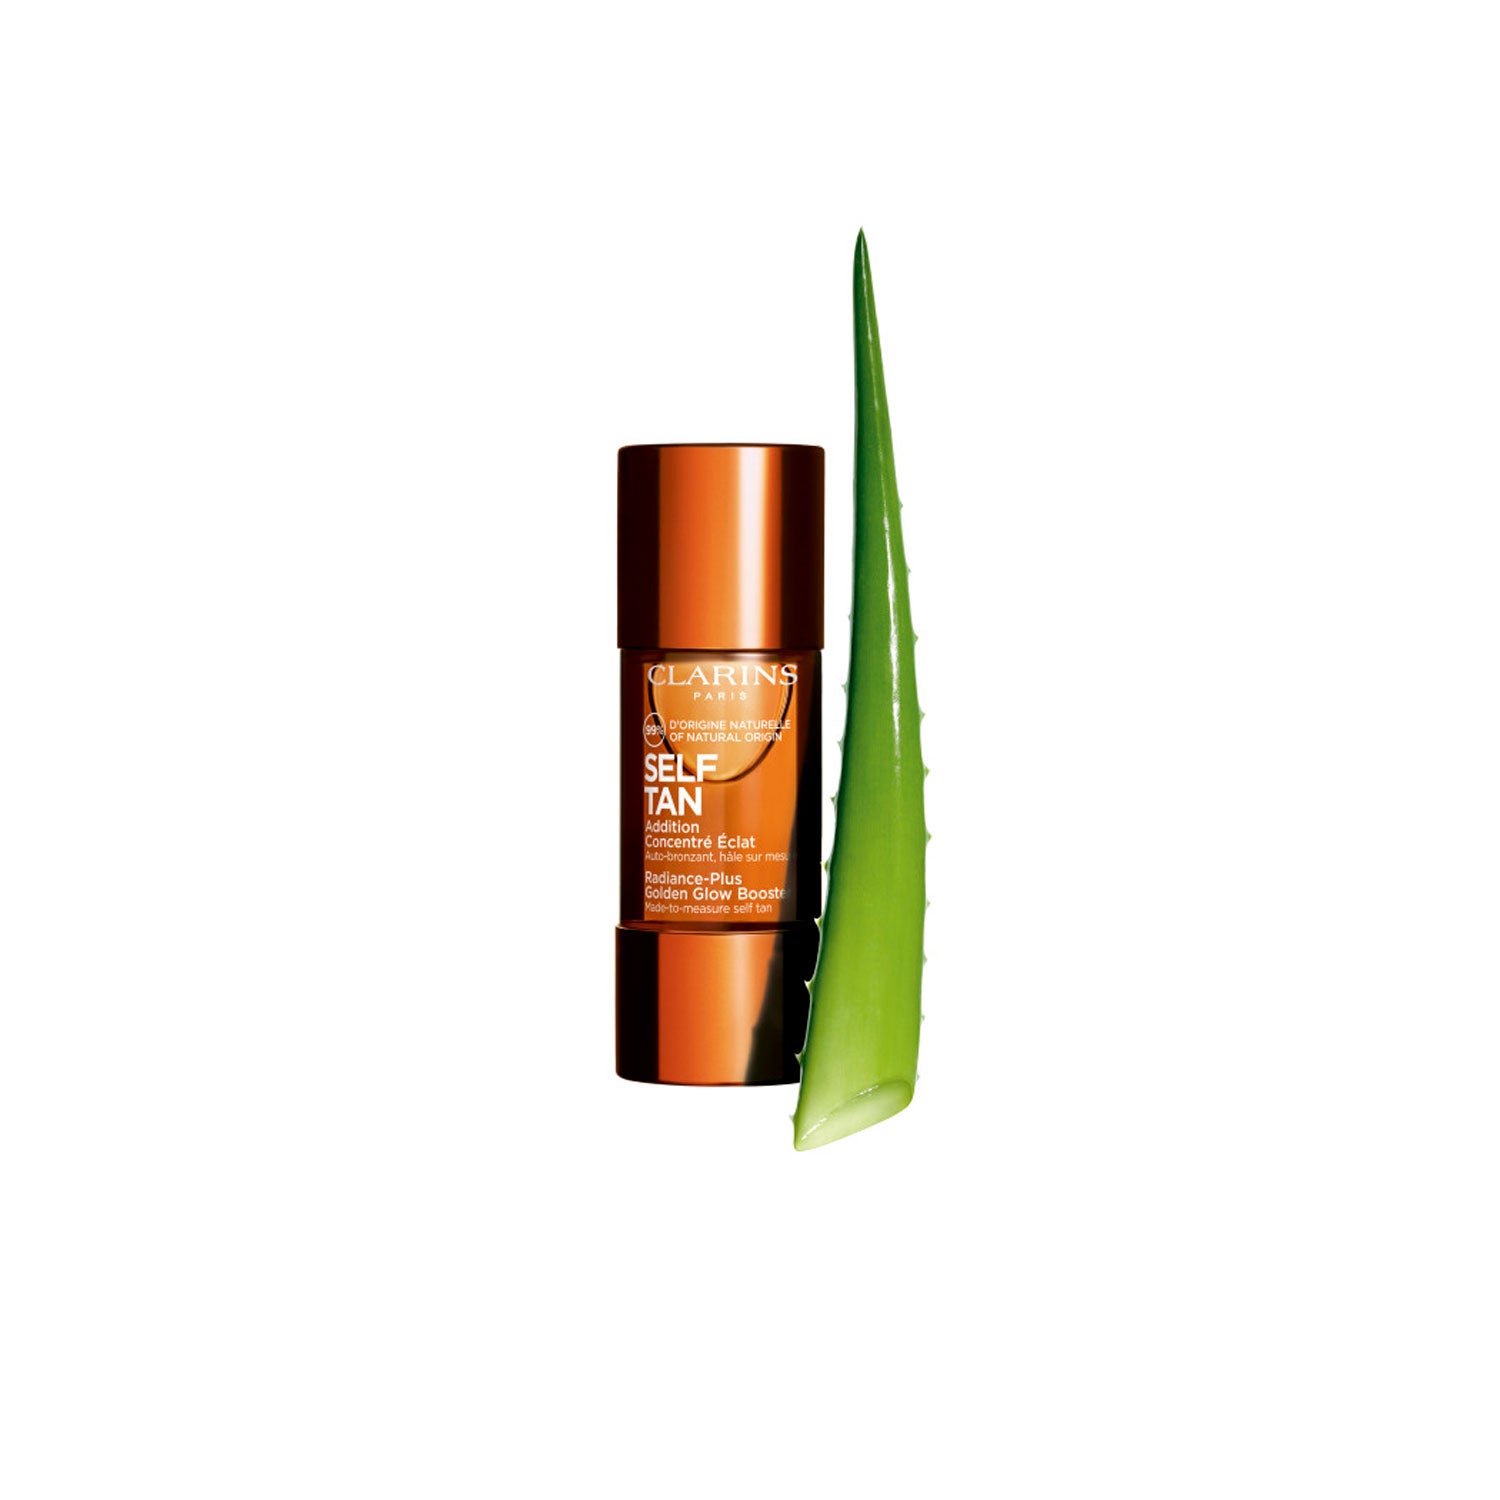 Clarins Self Tan Radiance-Plus Golden Glow Booster Face 15ml 2 Shaws Department Stores